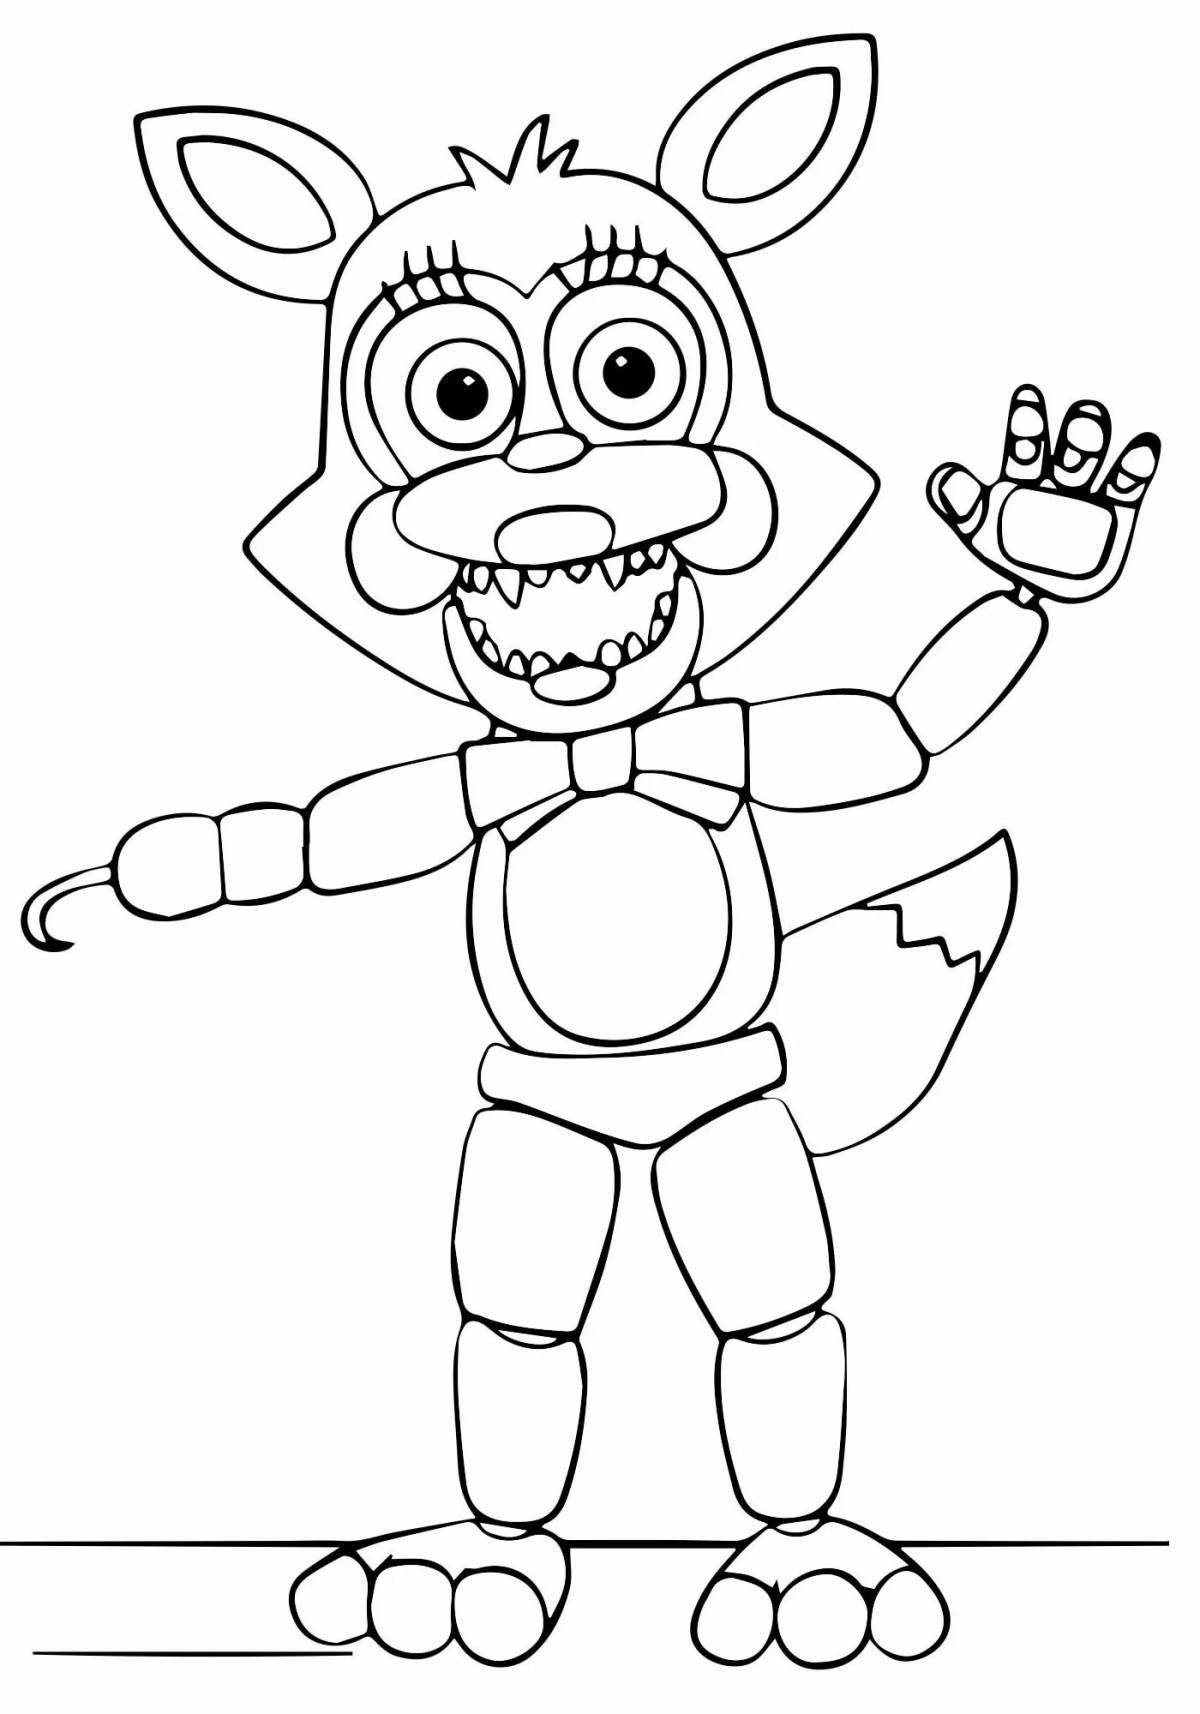 Playful freddy bear coloring page for kids